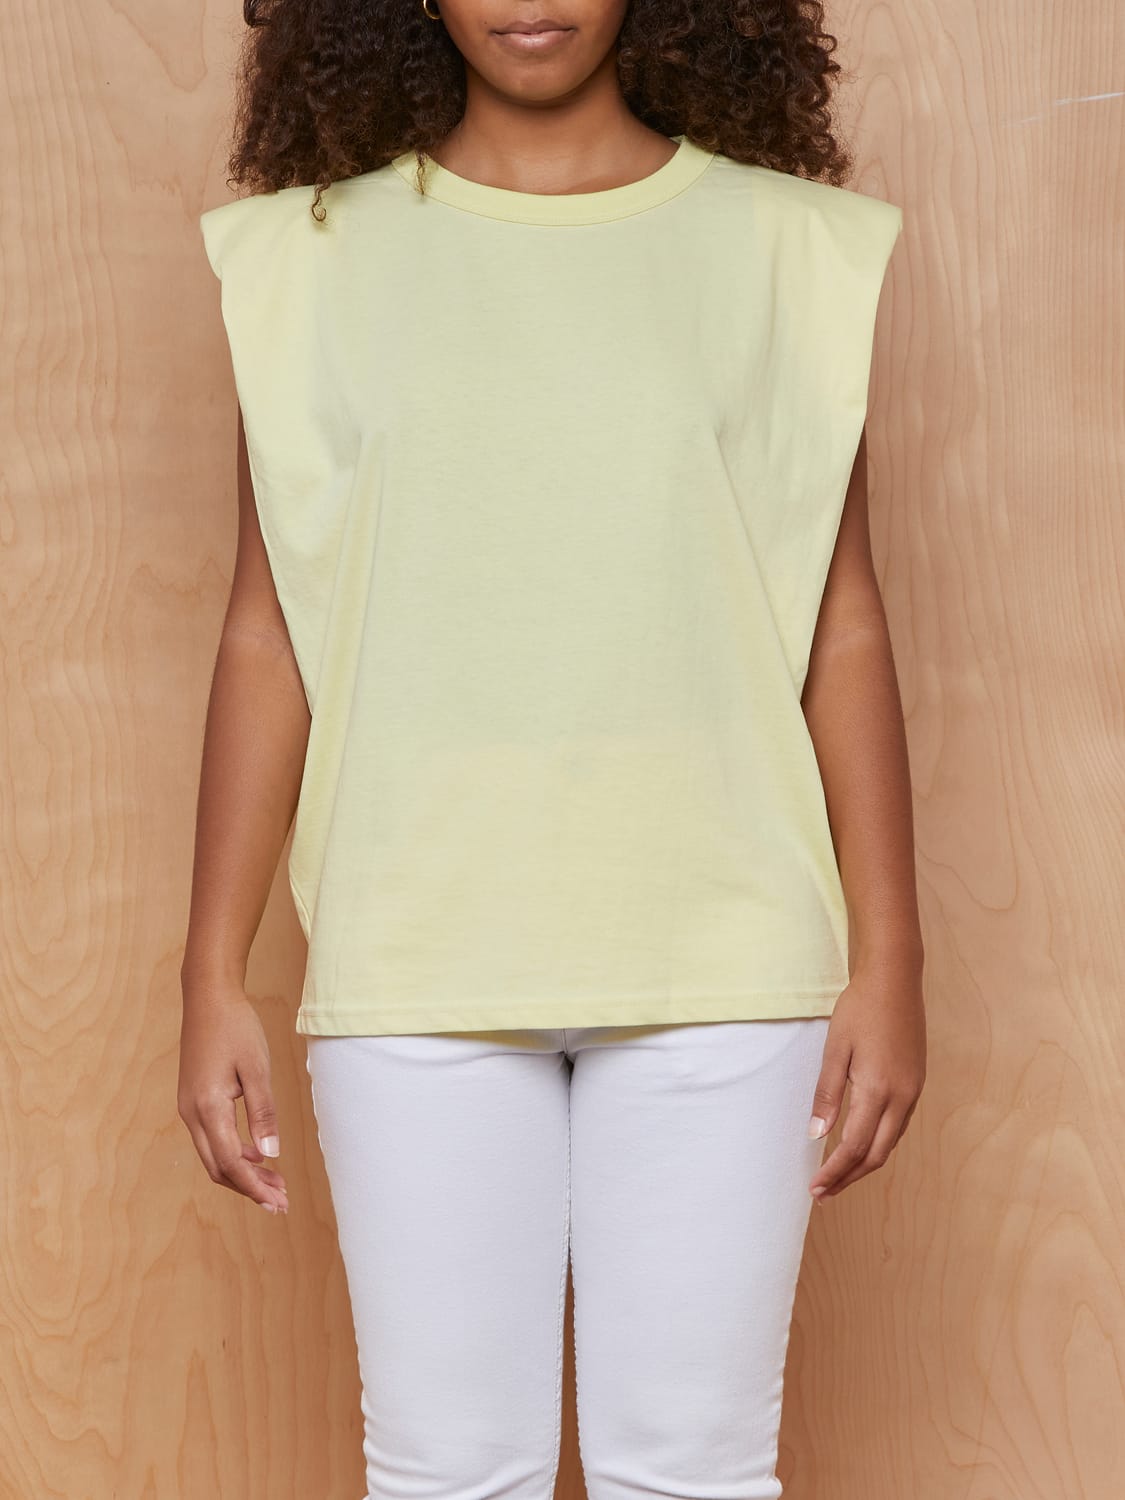 Eva Padded Shoulder Muscle T-Shirt in Pale Yellow by FRANKIESHOP X CAMILLECHARRIÈRE